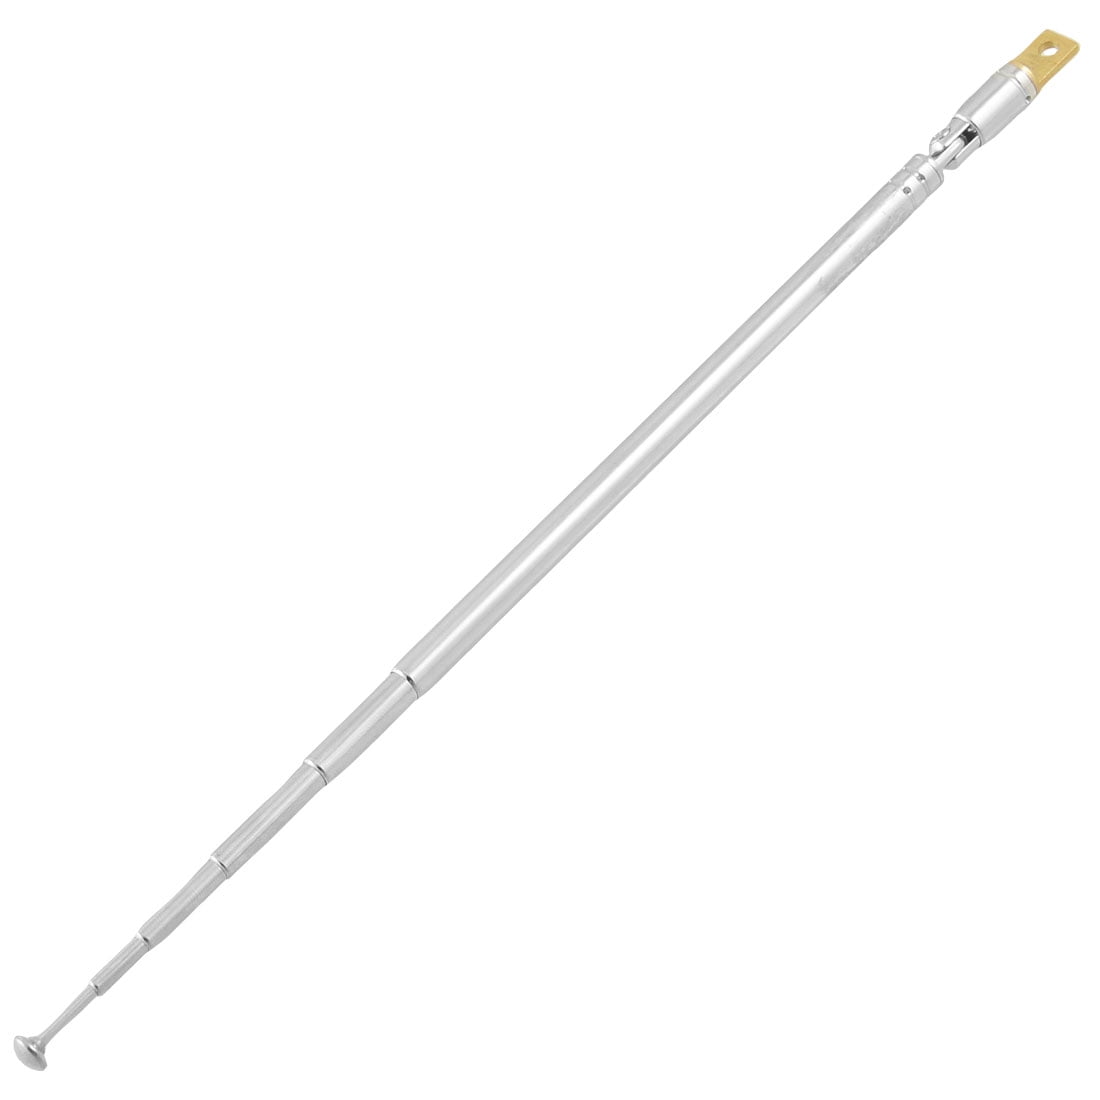 Radio TV Stainless Steel 6 Sections Telescopic Antenna Whip 67cm Extend Length 